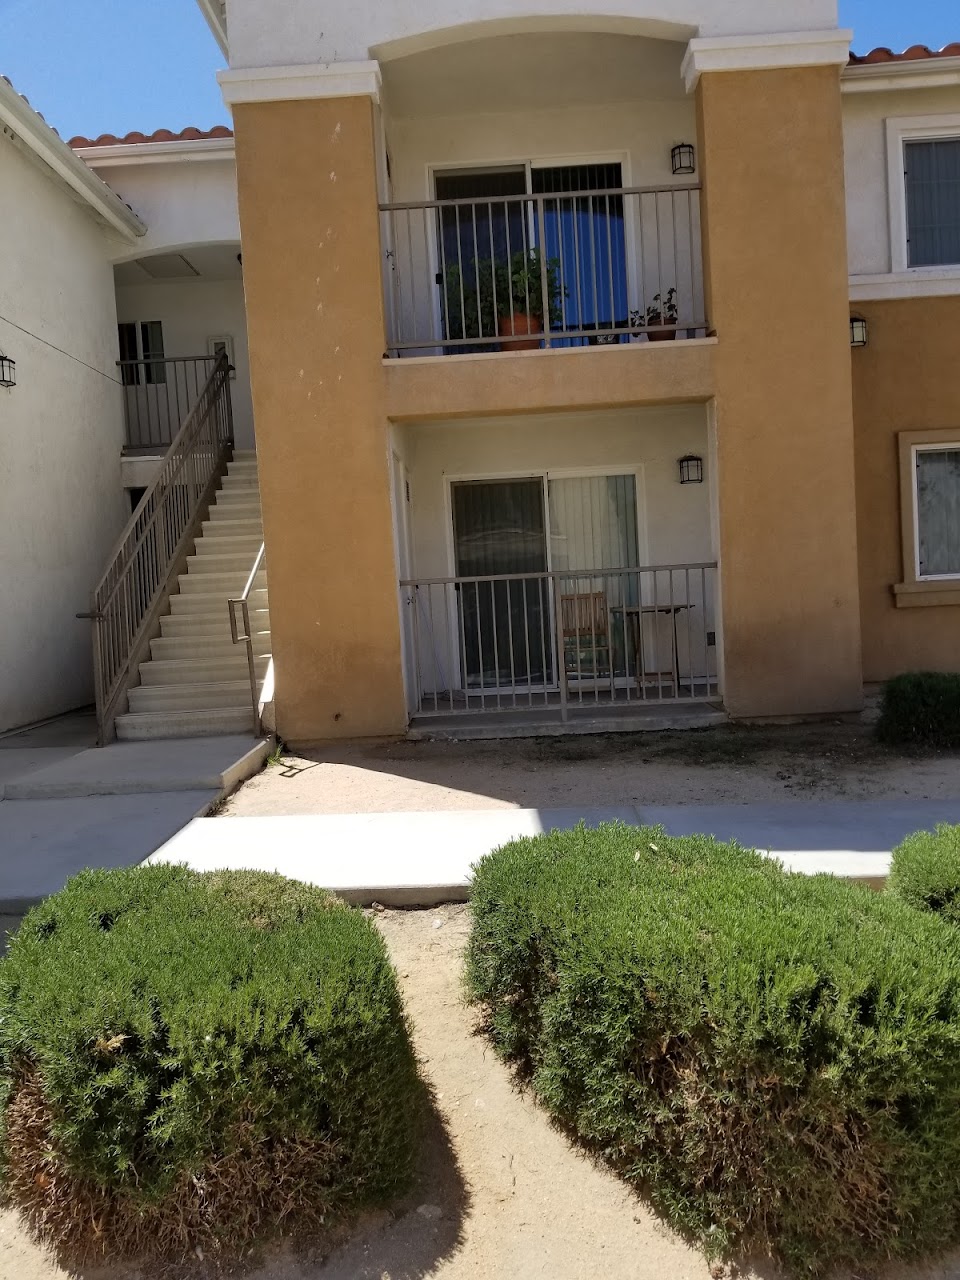 Photo of CASA BELLA APTS 1A. Affordable housing located at 16980 NISQUALLI RD VICTORVILLE, CA 92395